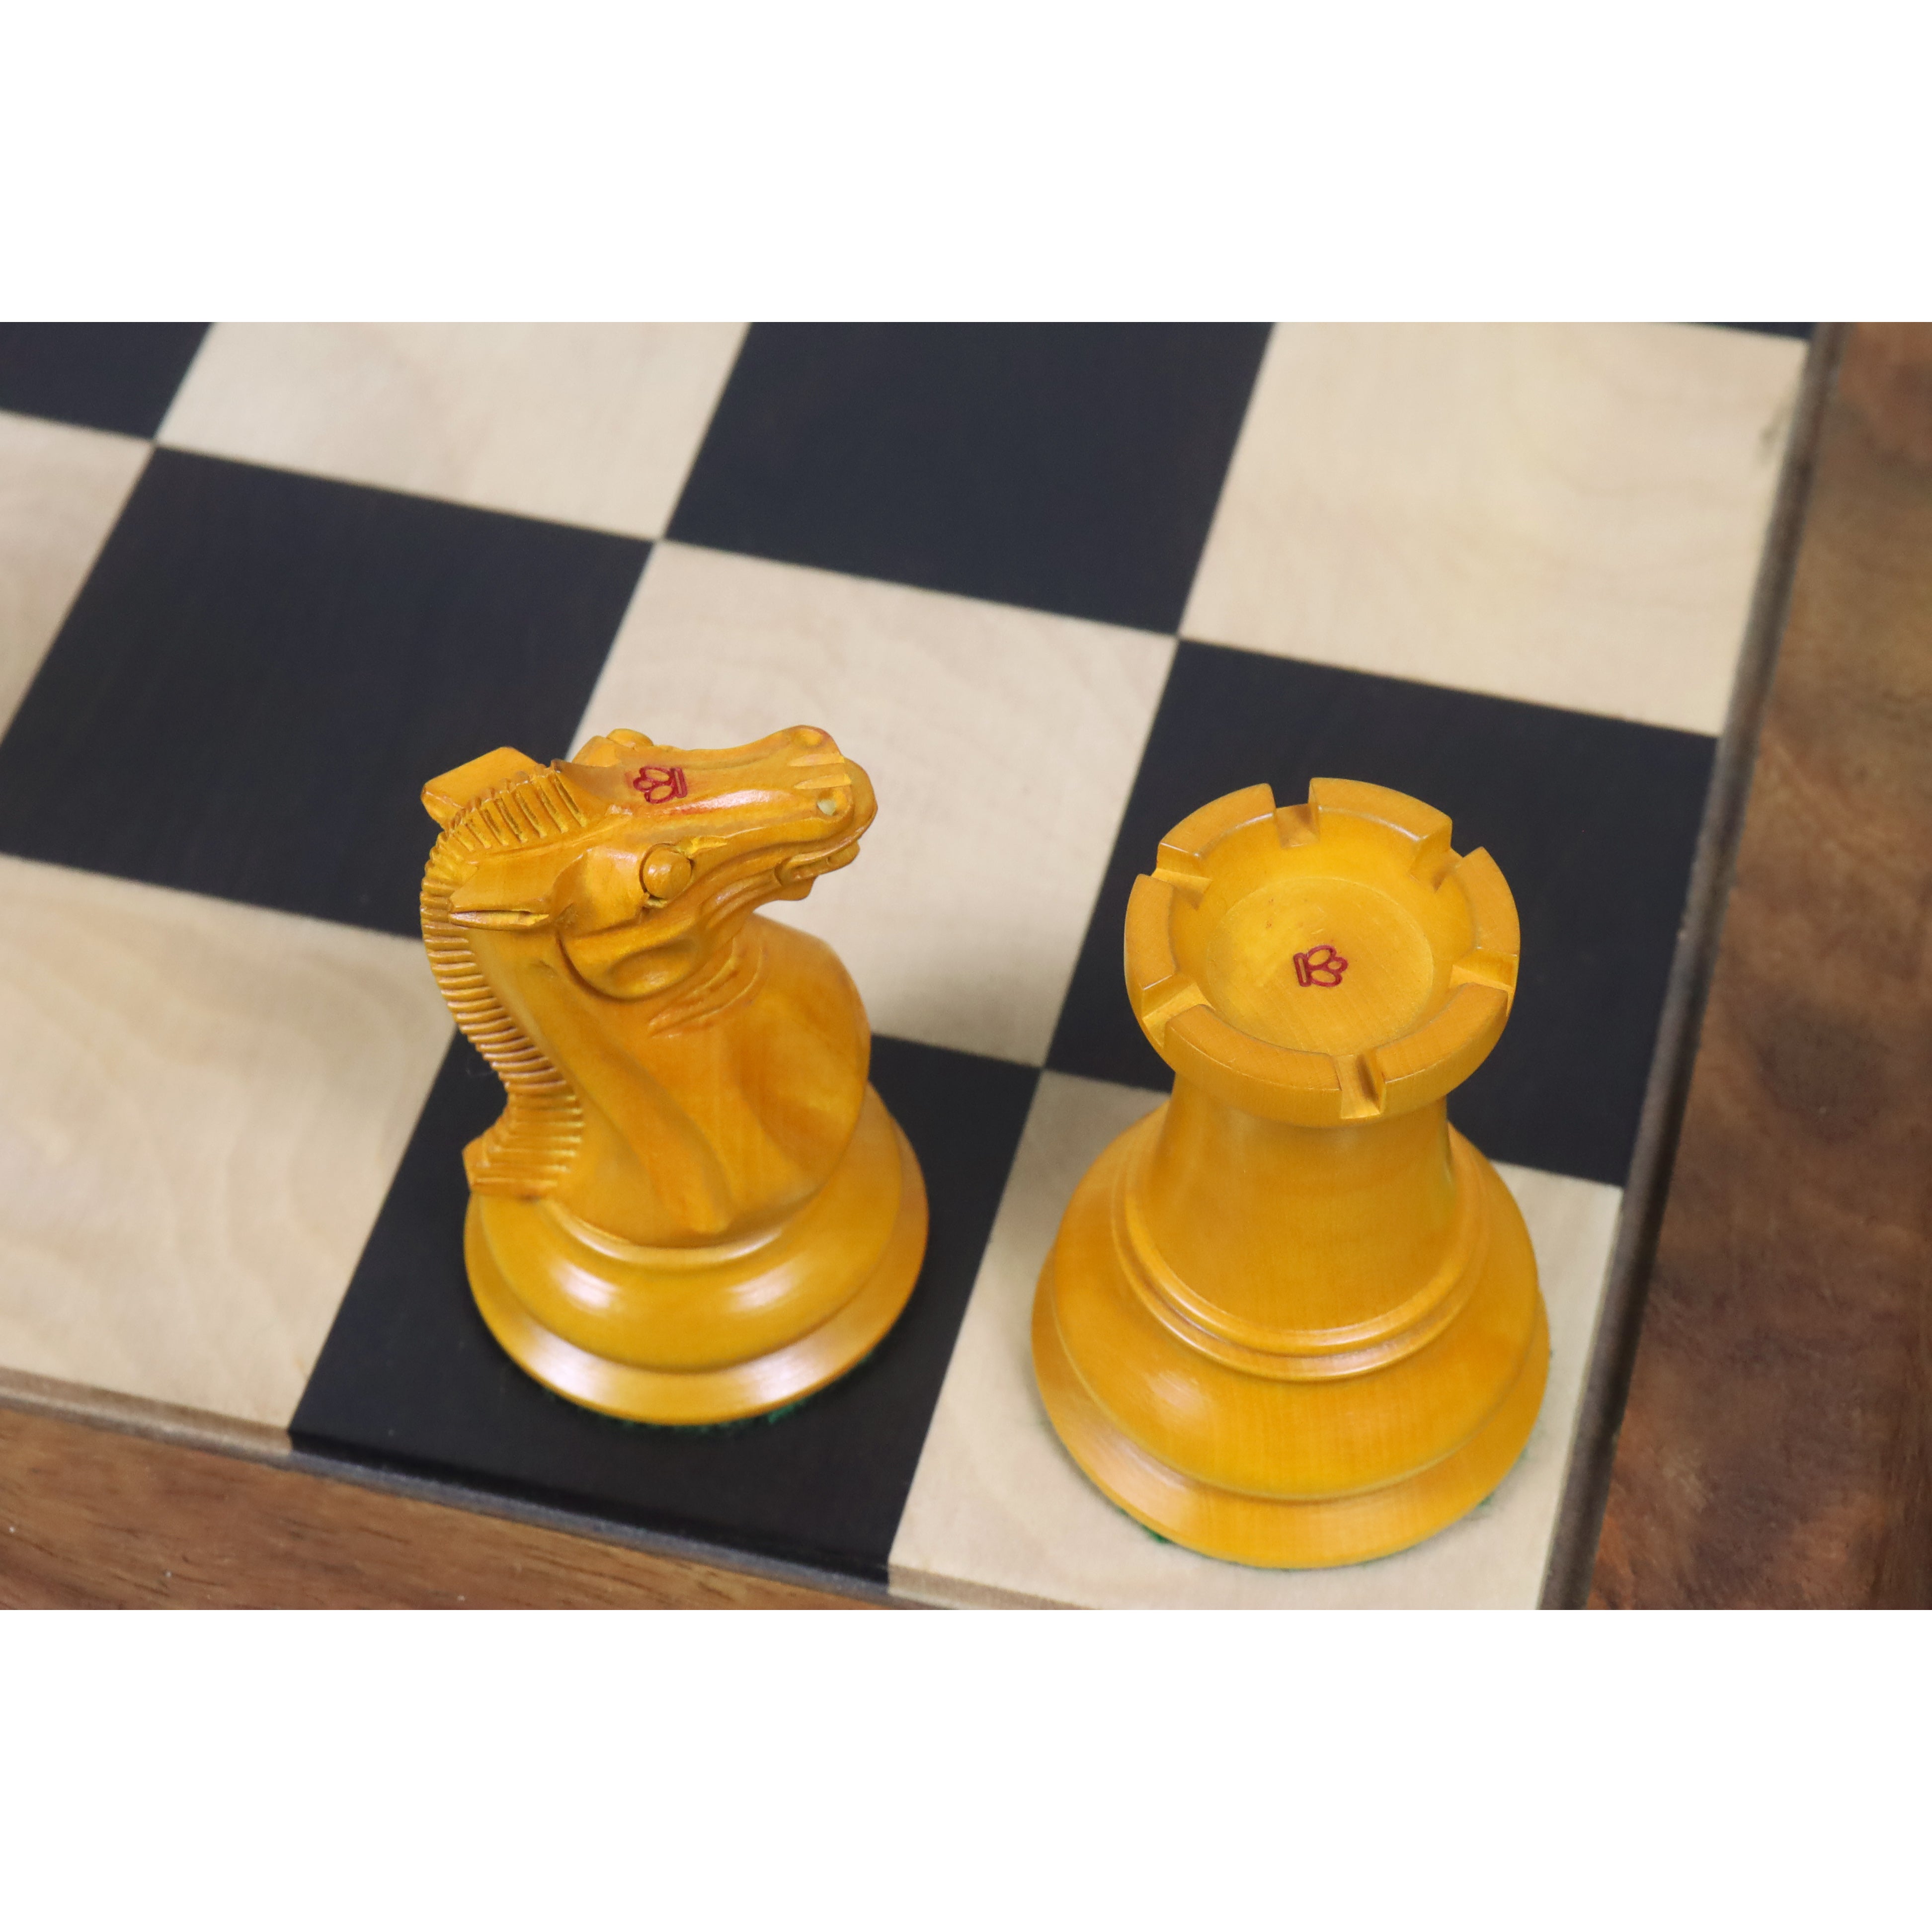 Slightly Imperfect 4.5" Reproduced 1849 Staunton Chess Pieces Only set- Antiqued Boxwood & Ebony